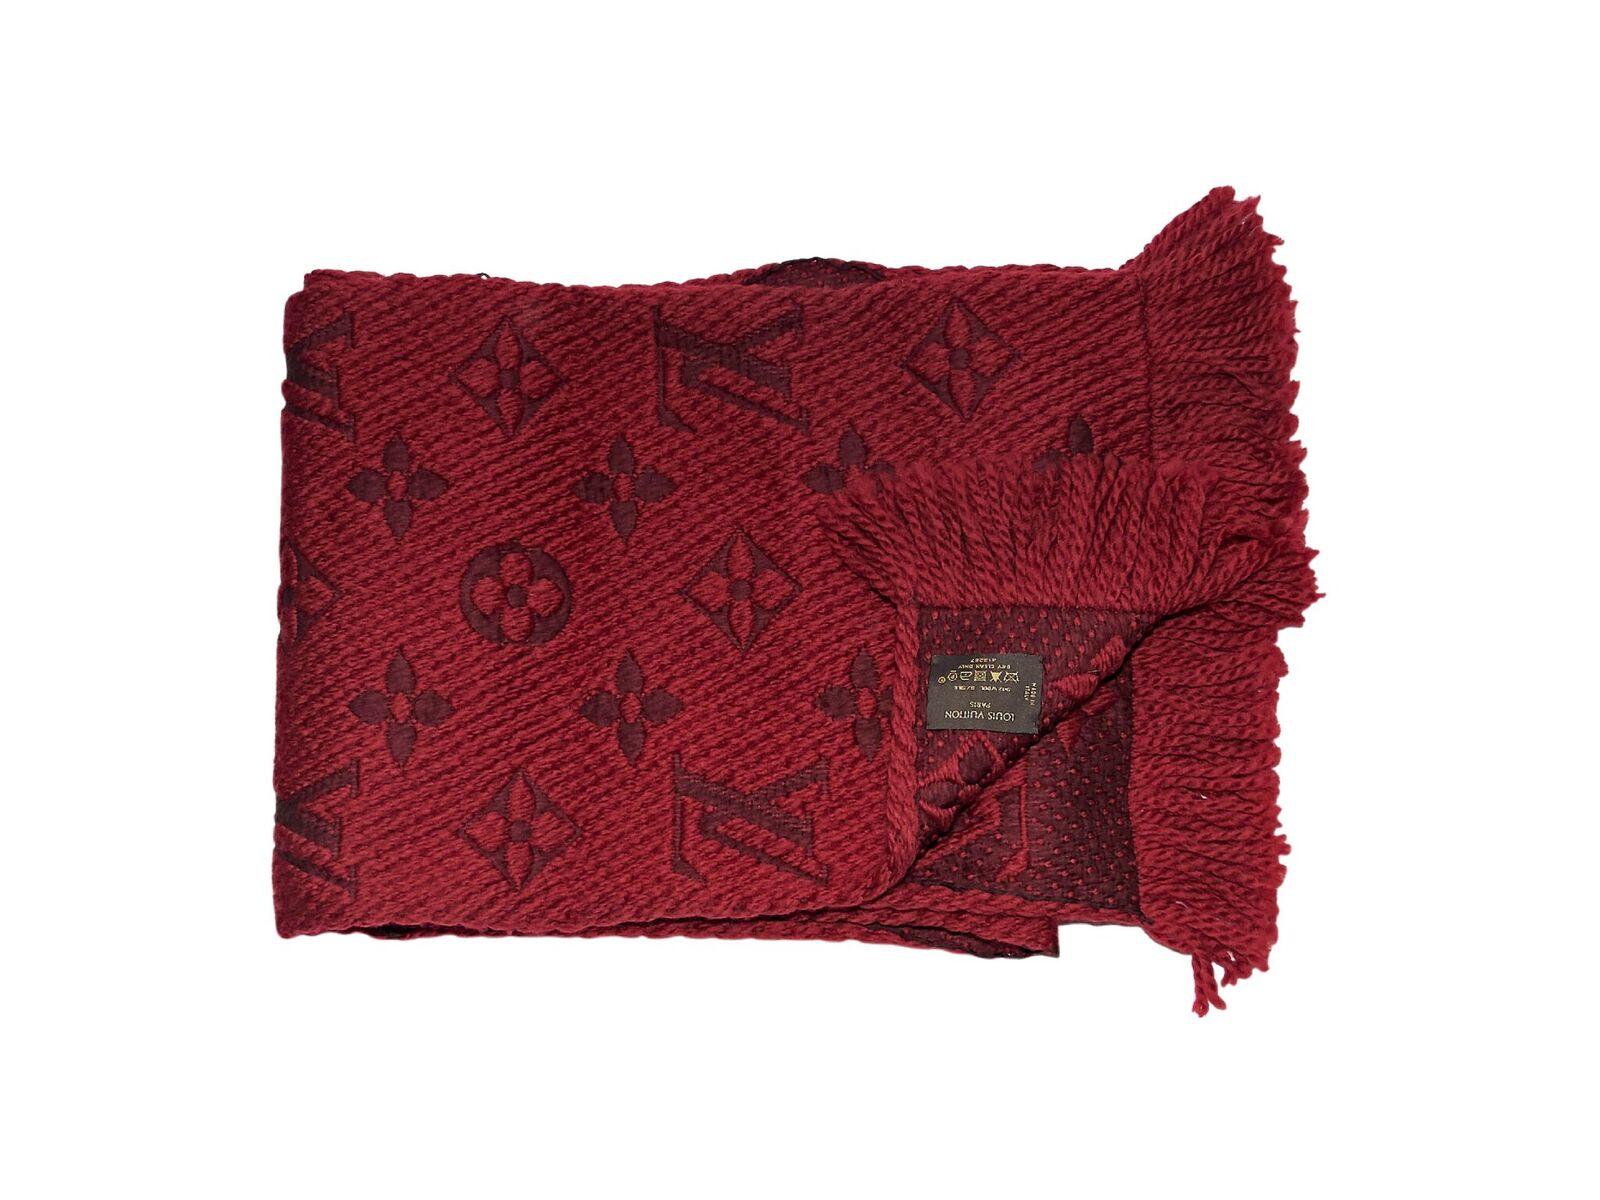 Product details:  Red wool logomania scarf by Louis Vuitton.  Fringed trim.  65